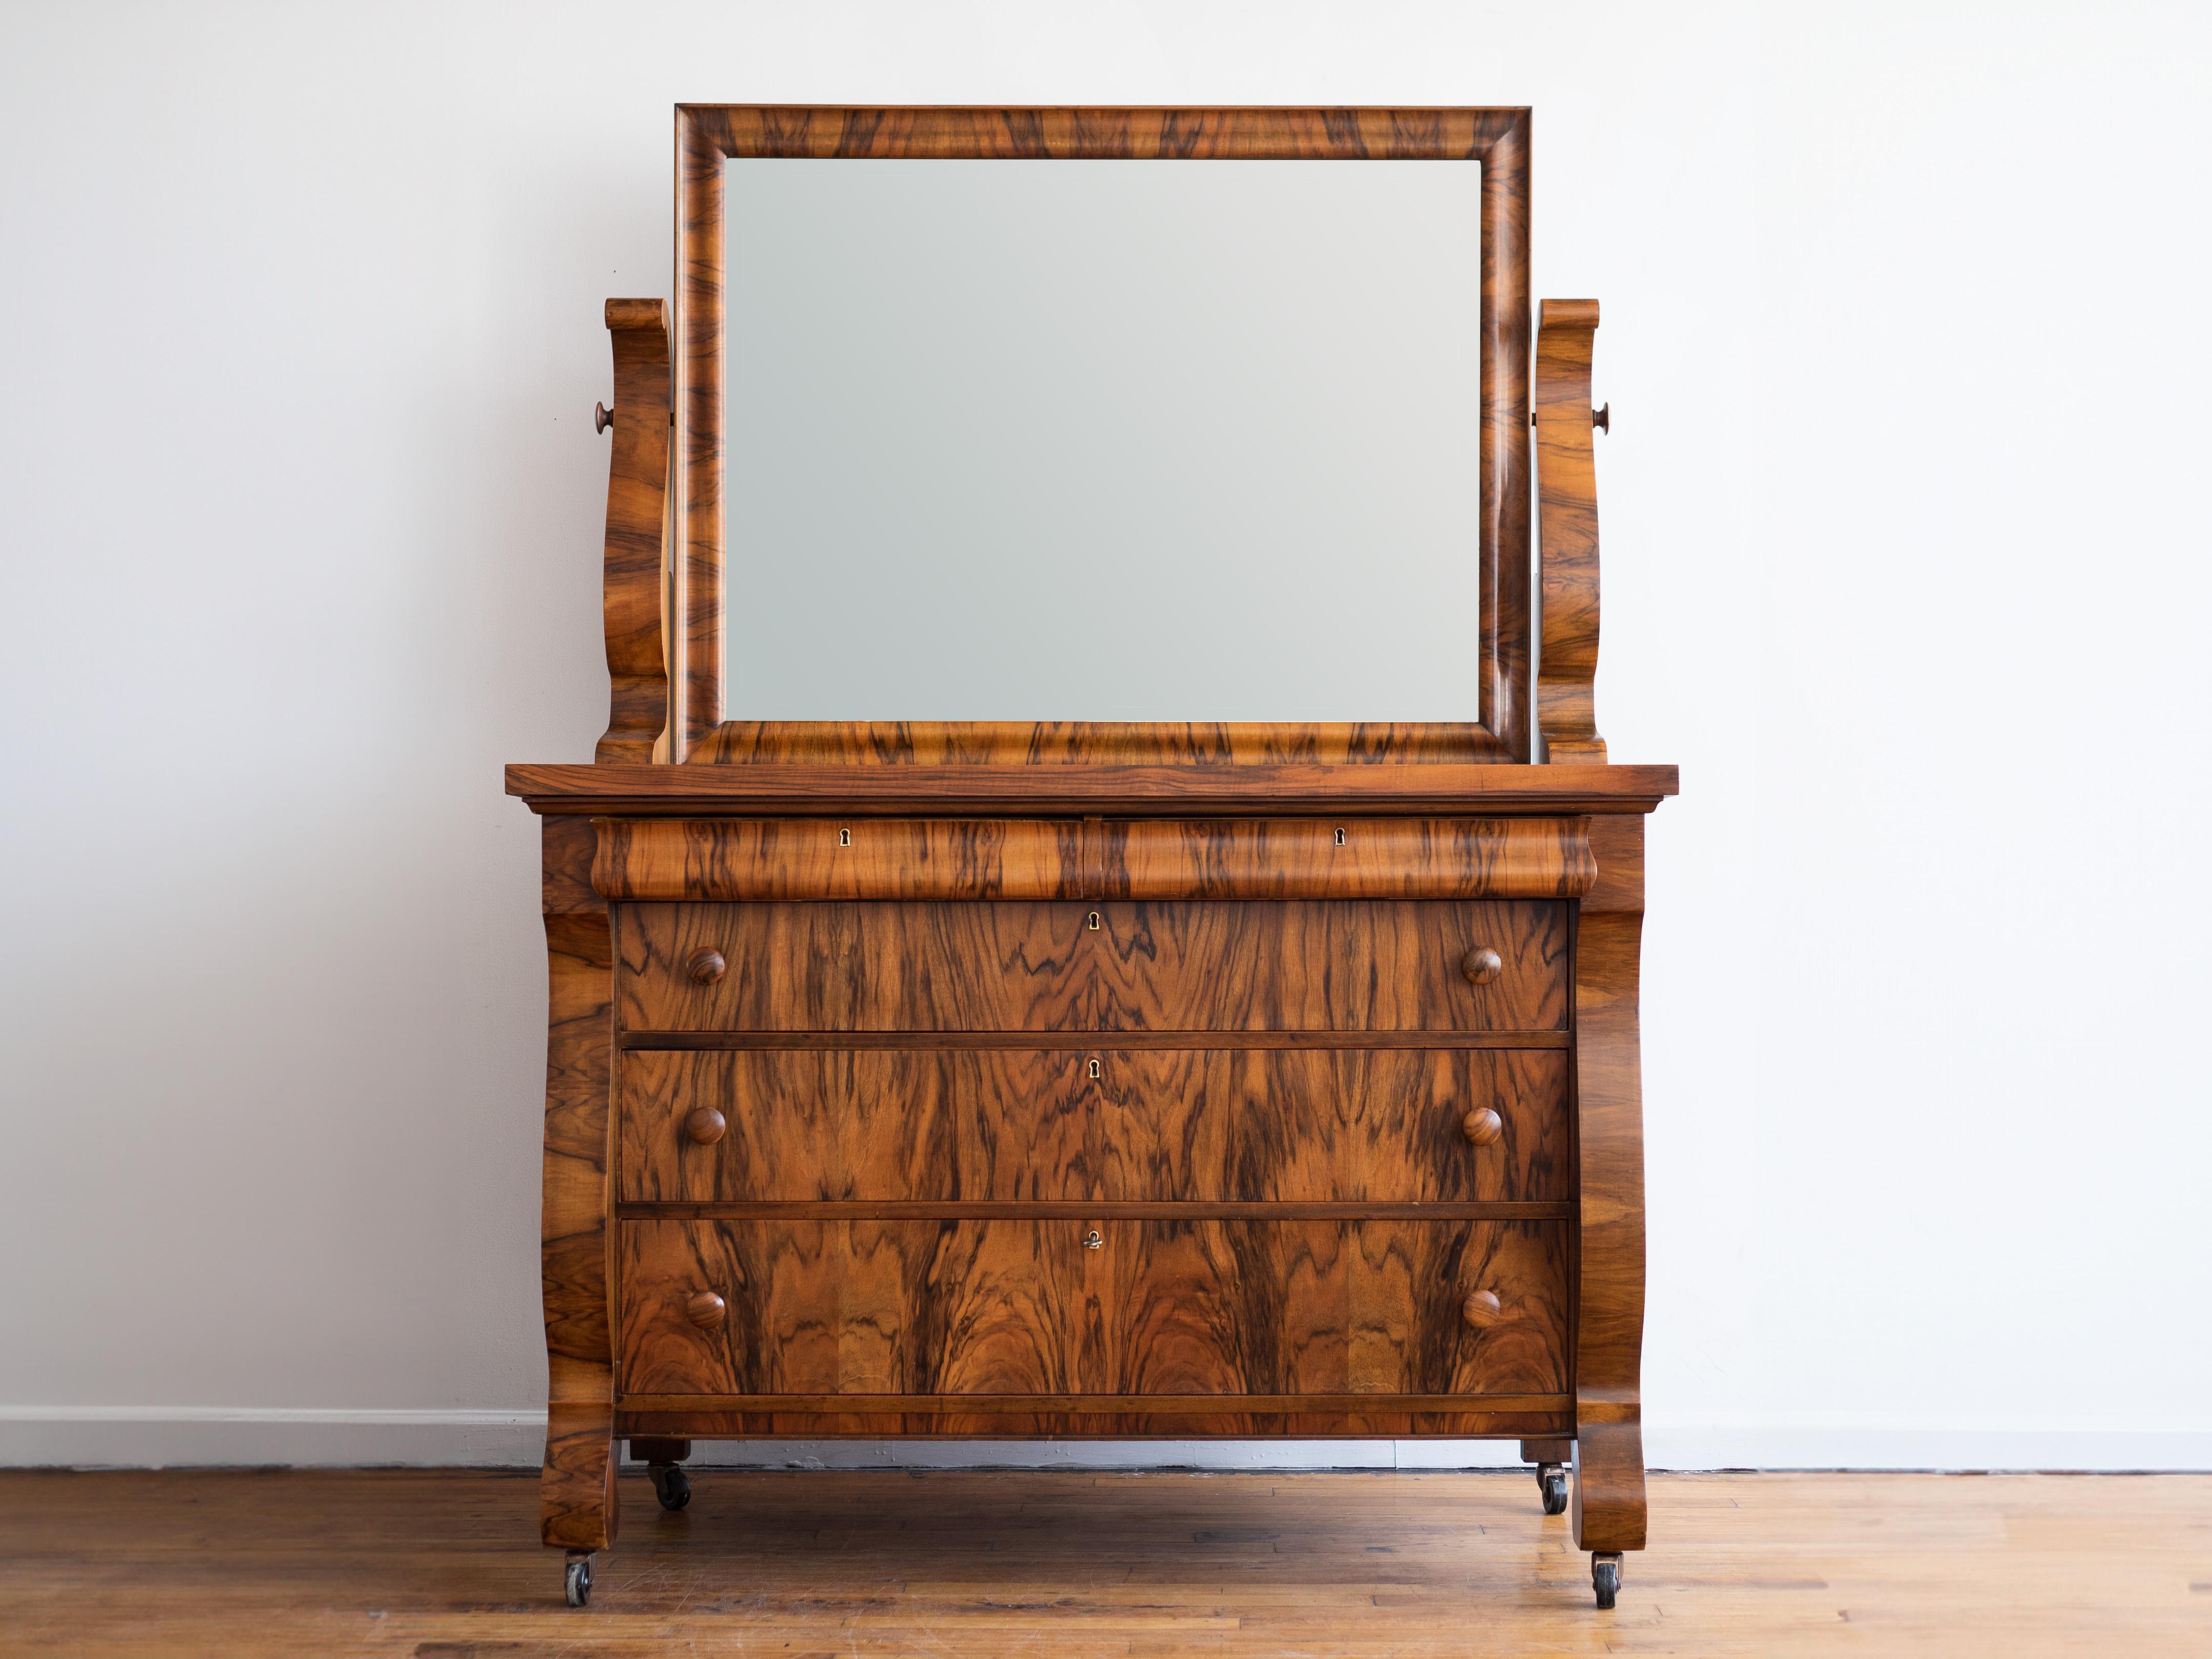 52” x 25” x 35”H (without wheels); mirror adds 35”H

A captivating representation of early Biedermeier design, influenced by the Empire era. This remarkable Biedermeier dresser exhibits an exquisite blend of aesthetics and functionality. Its